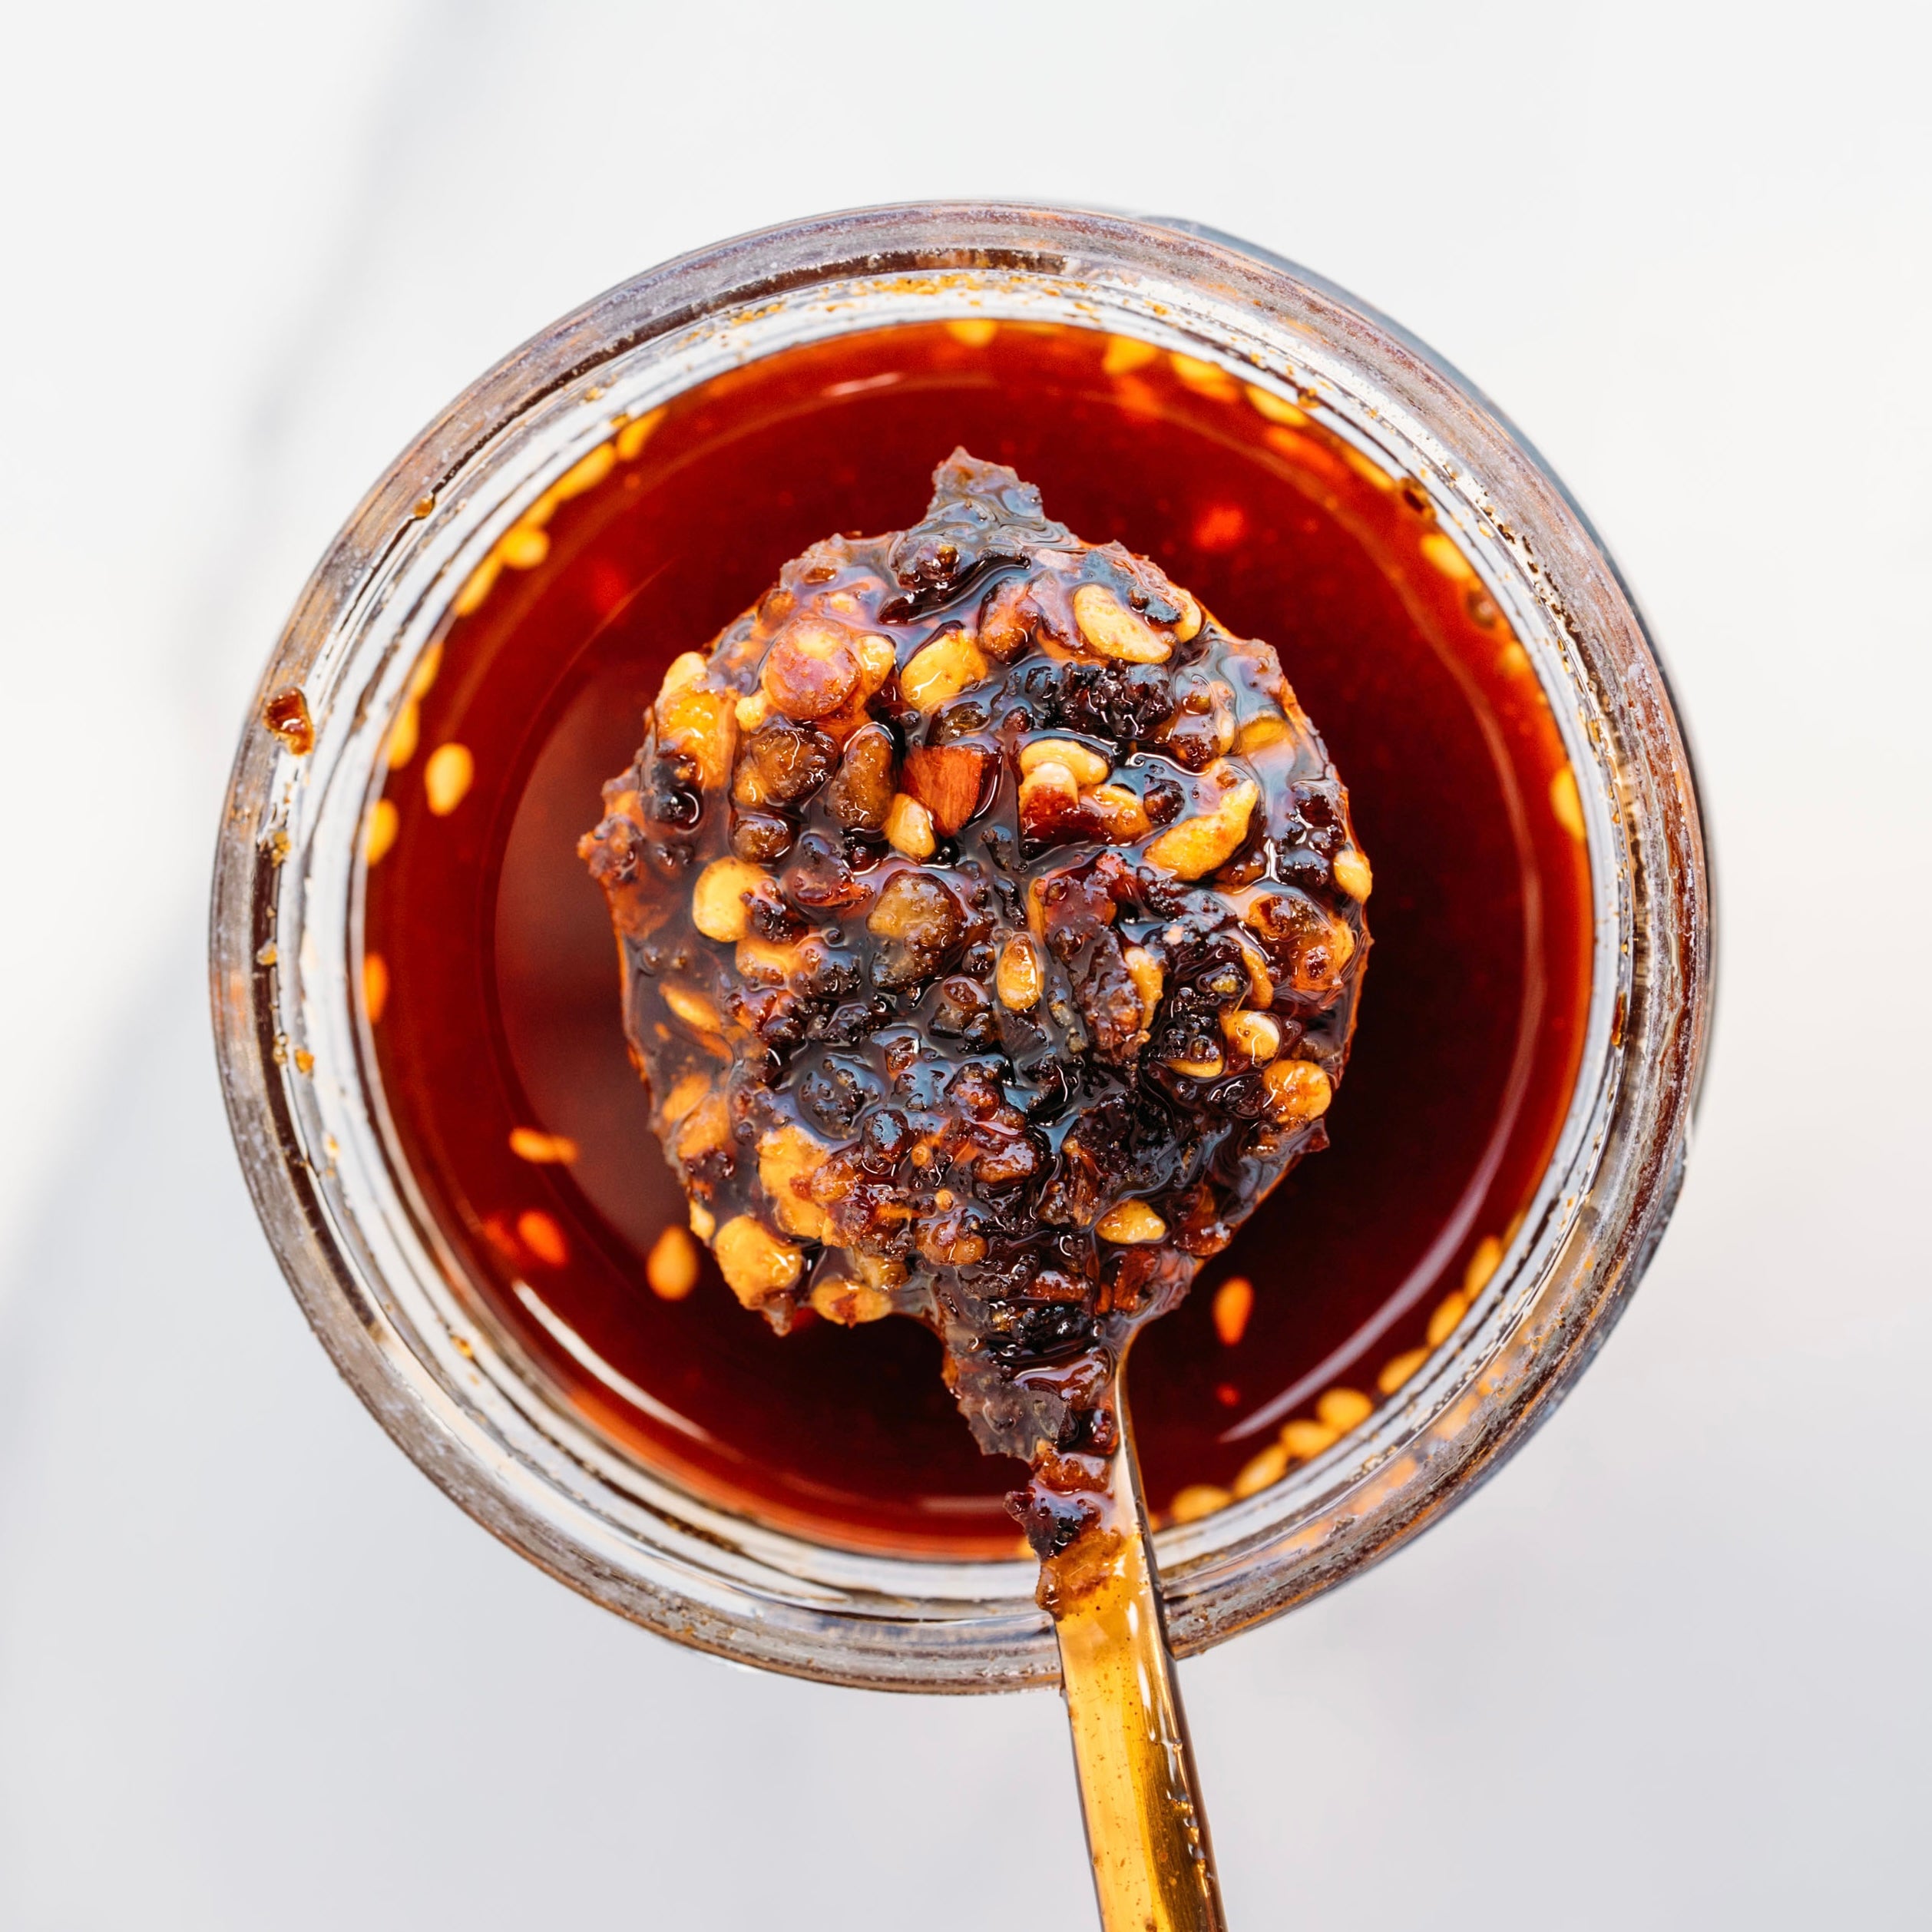 The basics: What is chili oil?